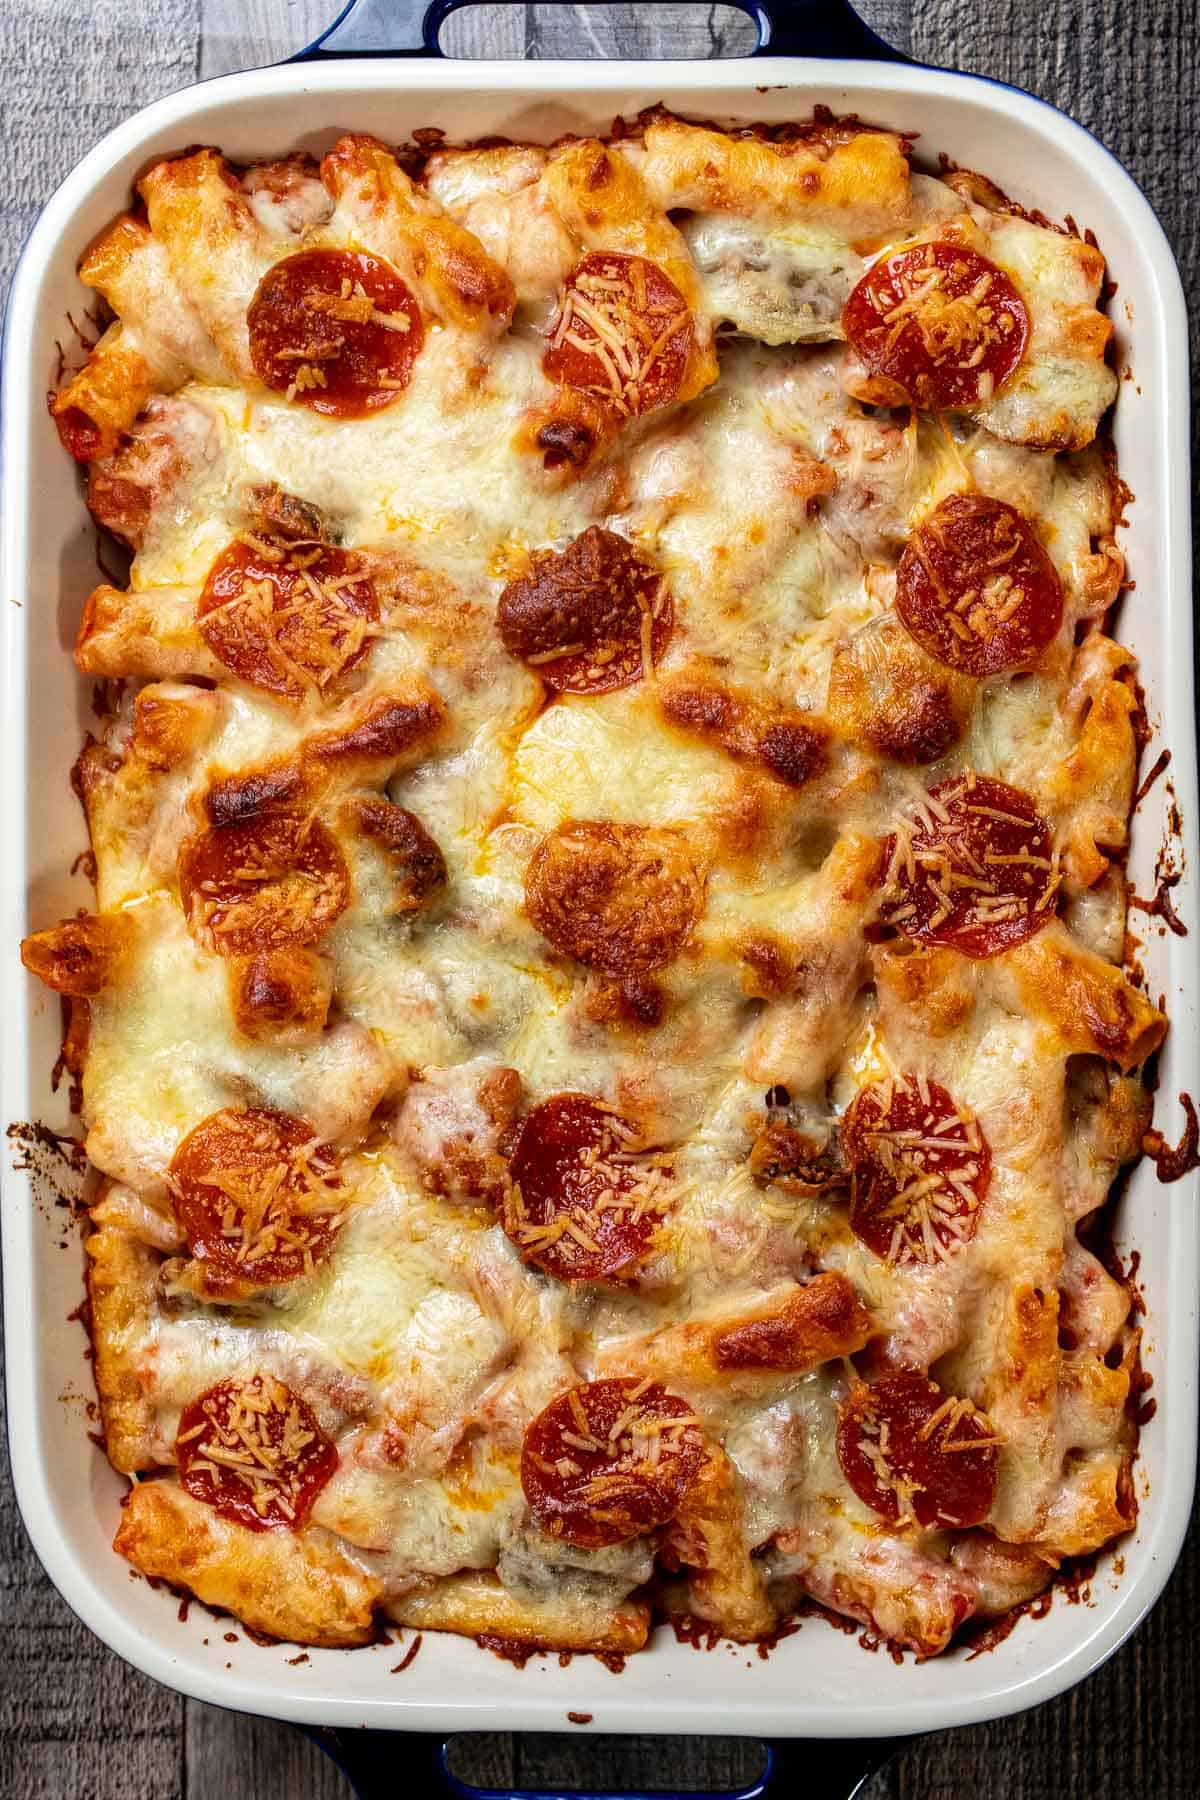 Baked rigatoni with Italian sausage and meatballs right out of the oven.